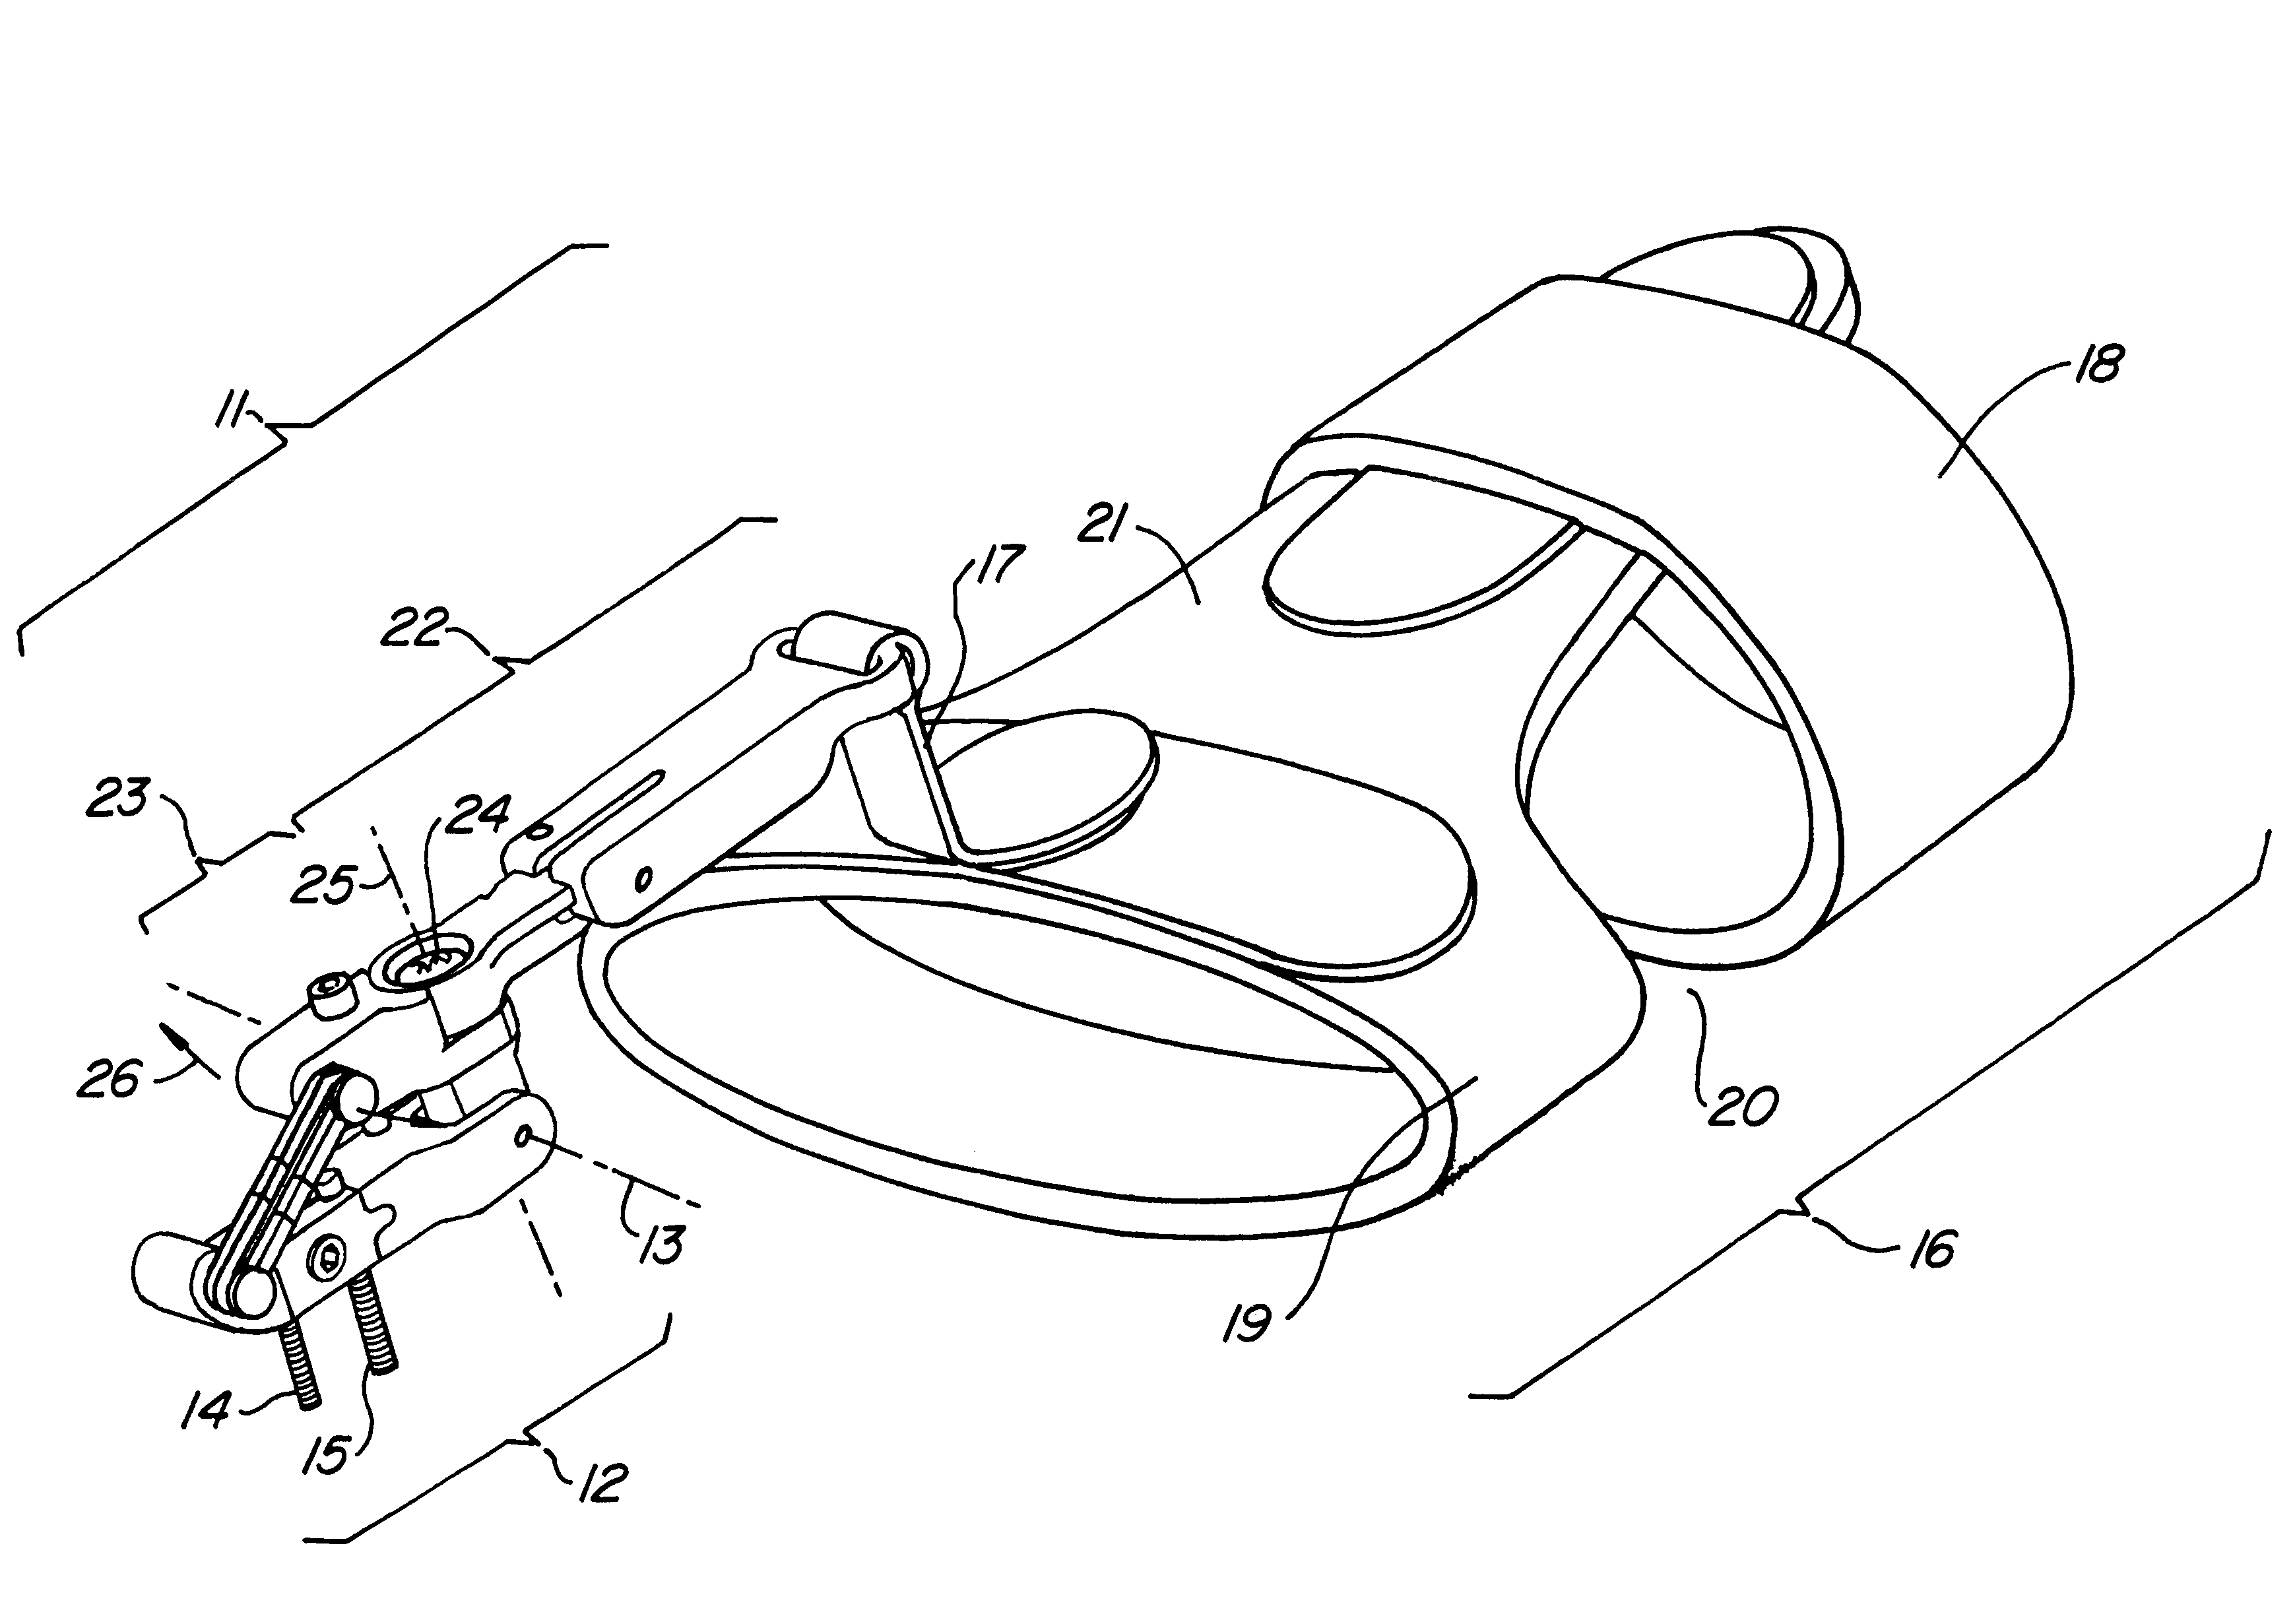 Medical device for correcting finger joint contractures